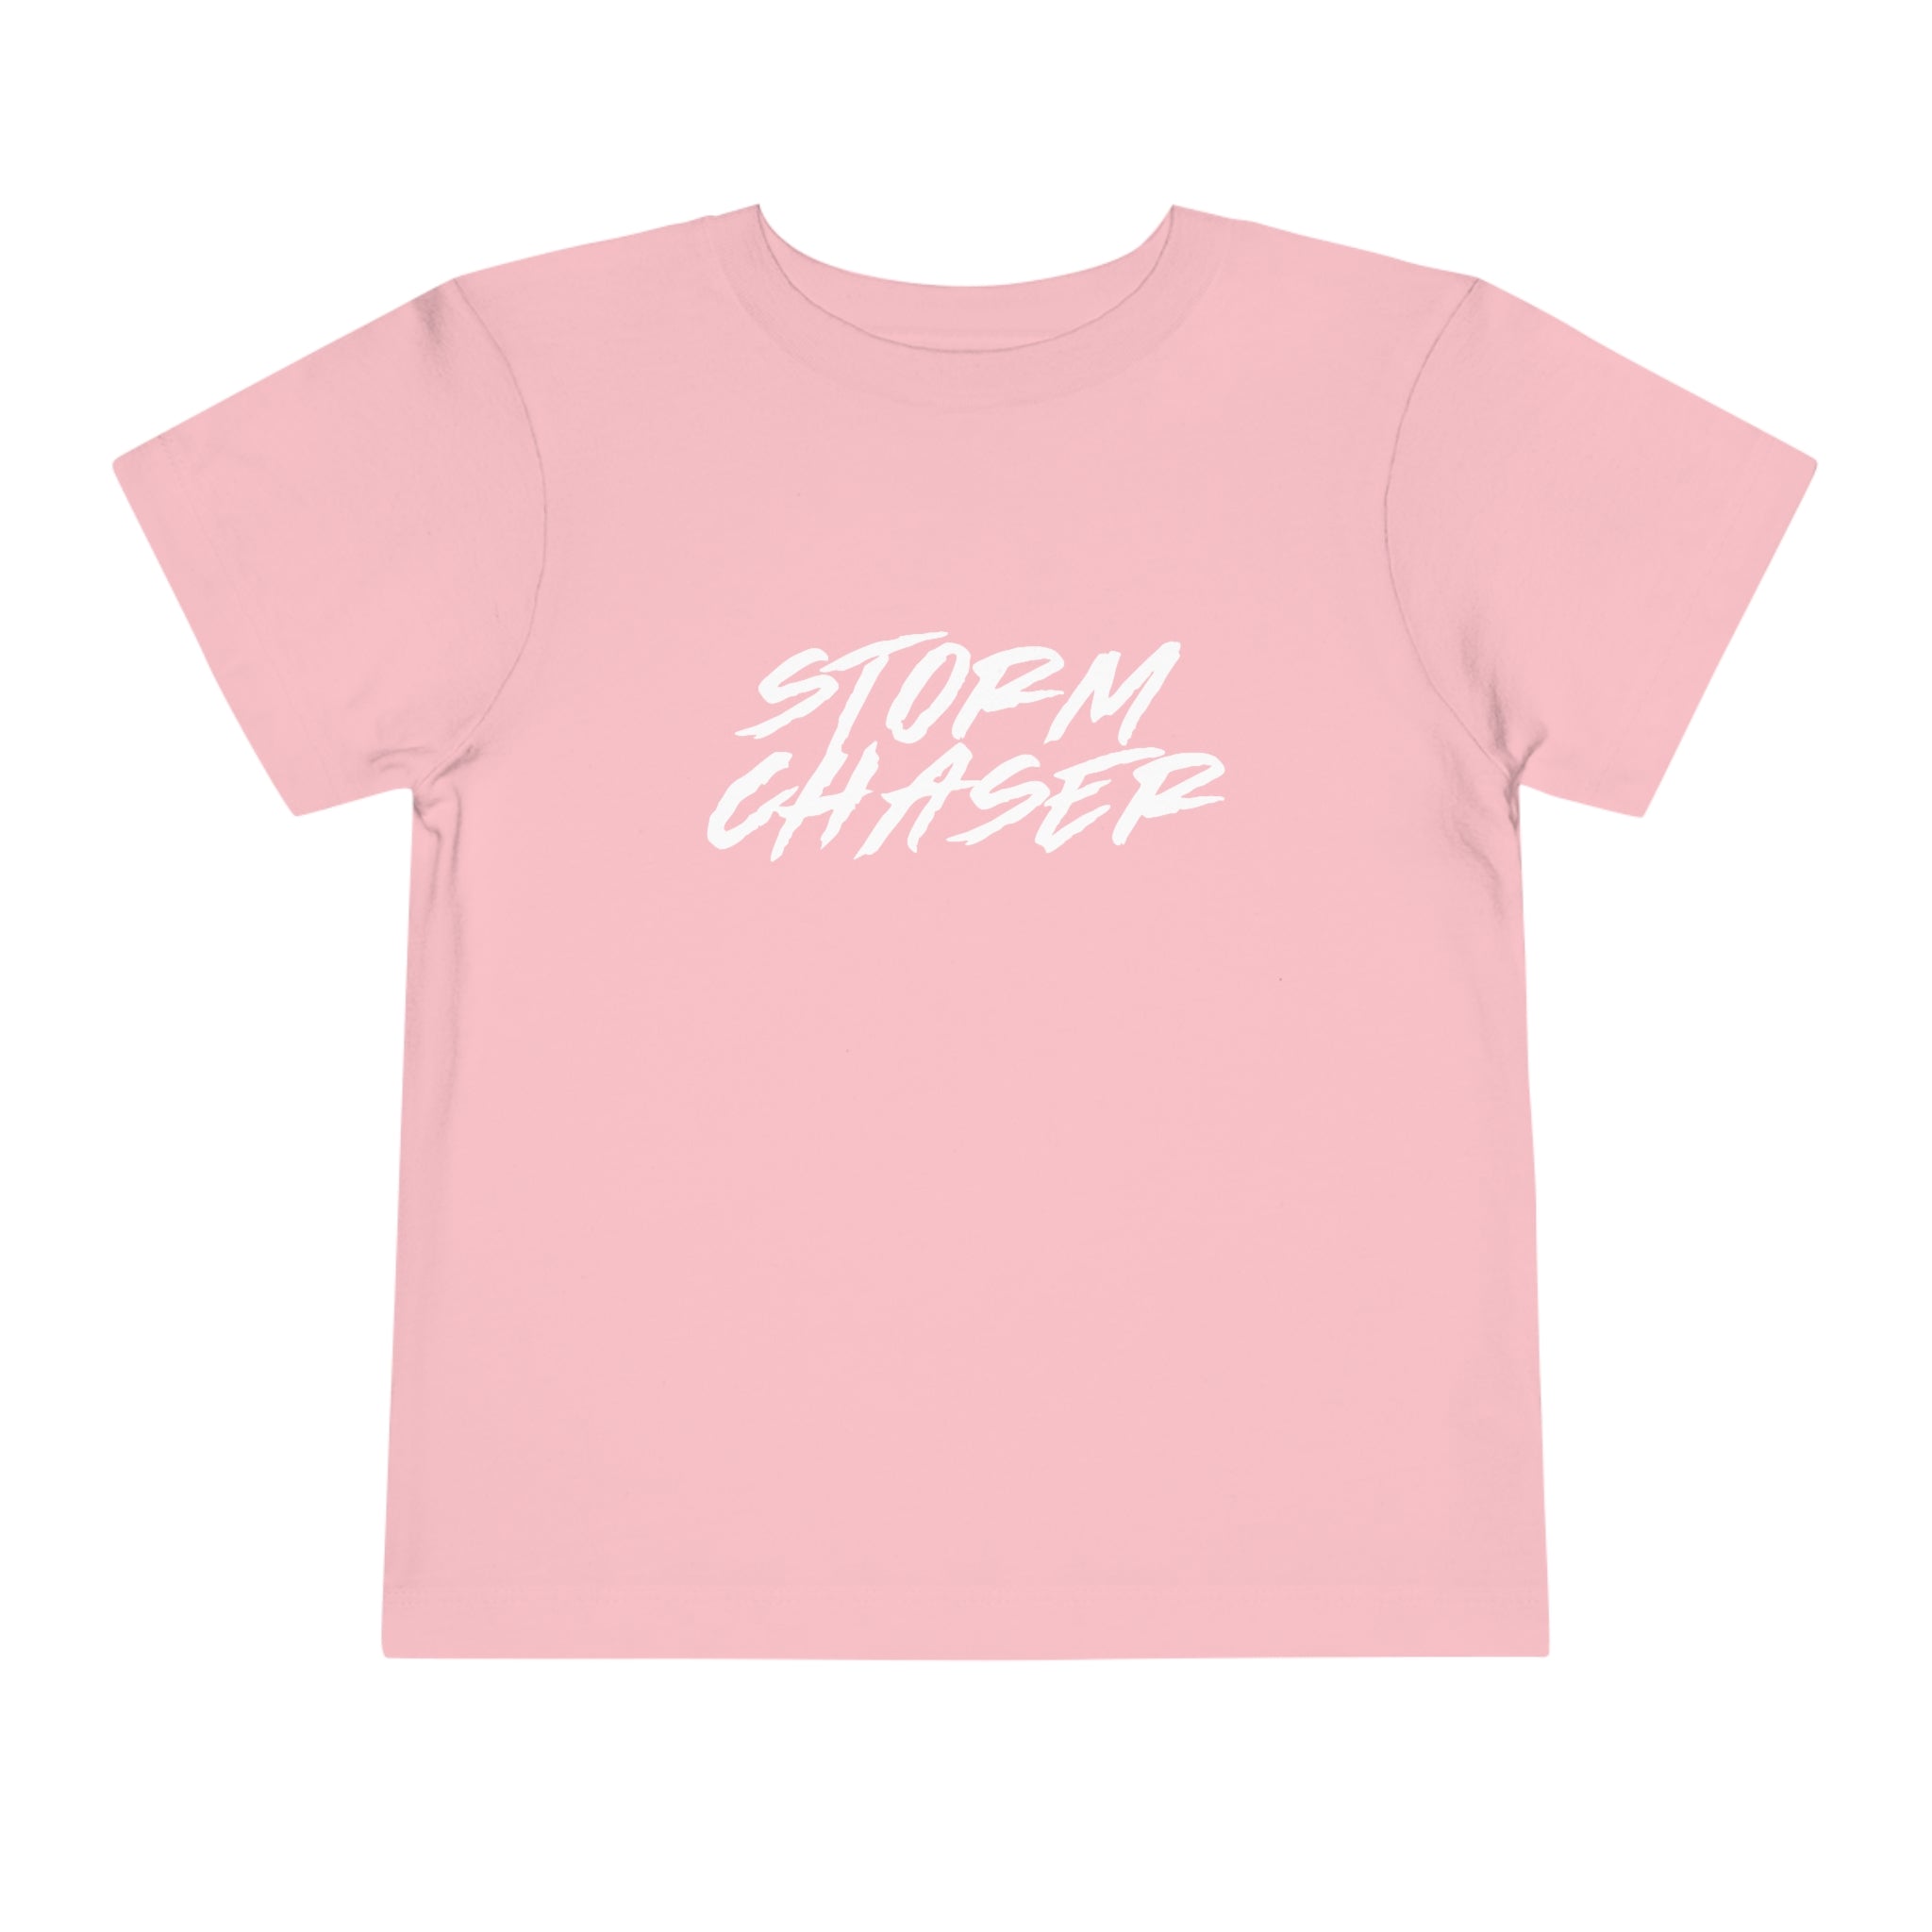 Storm Chaser Toddler Tee 